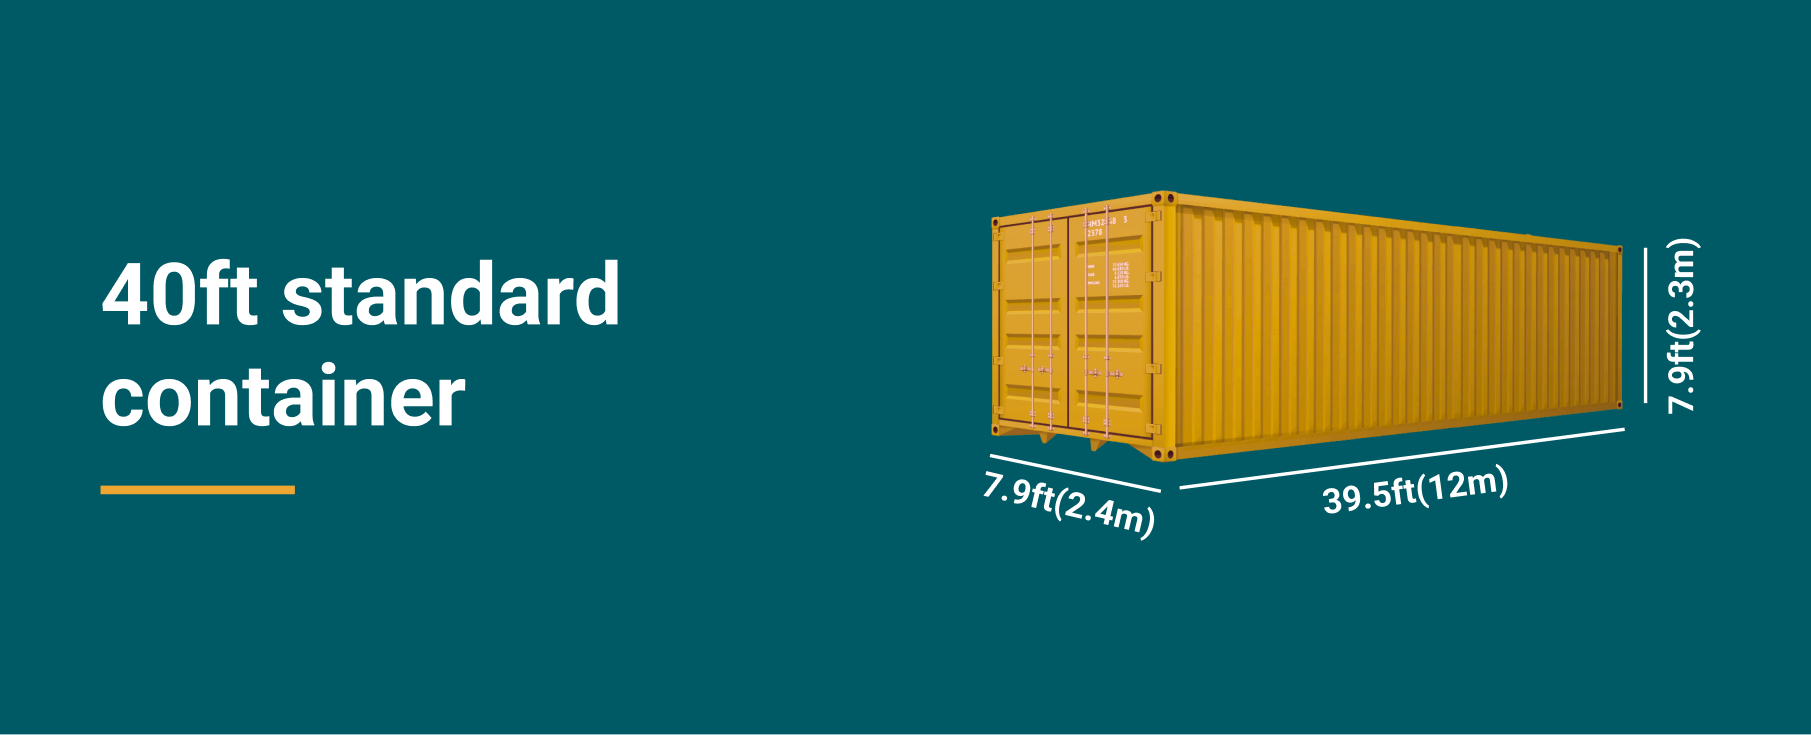 https://www.container-xchange.com/wp-content/uploads/2022/03/40Standard-container-1.png